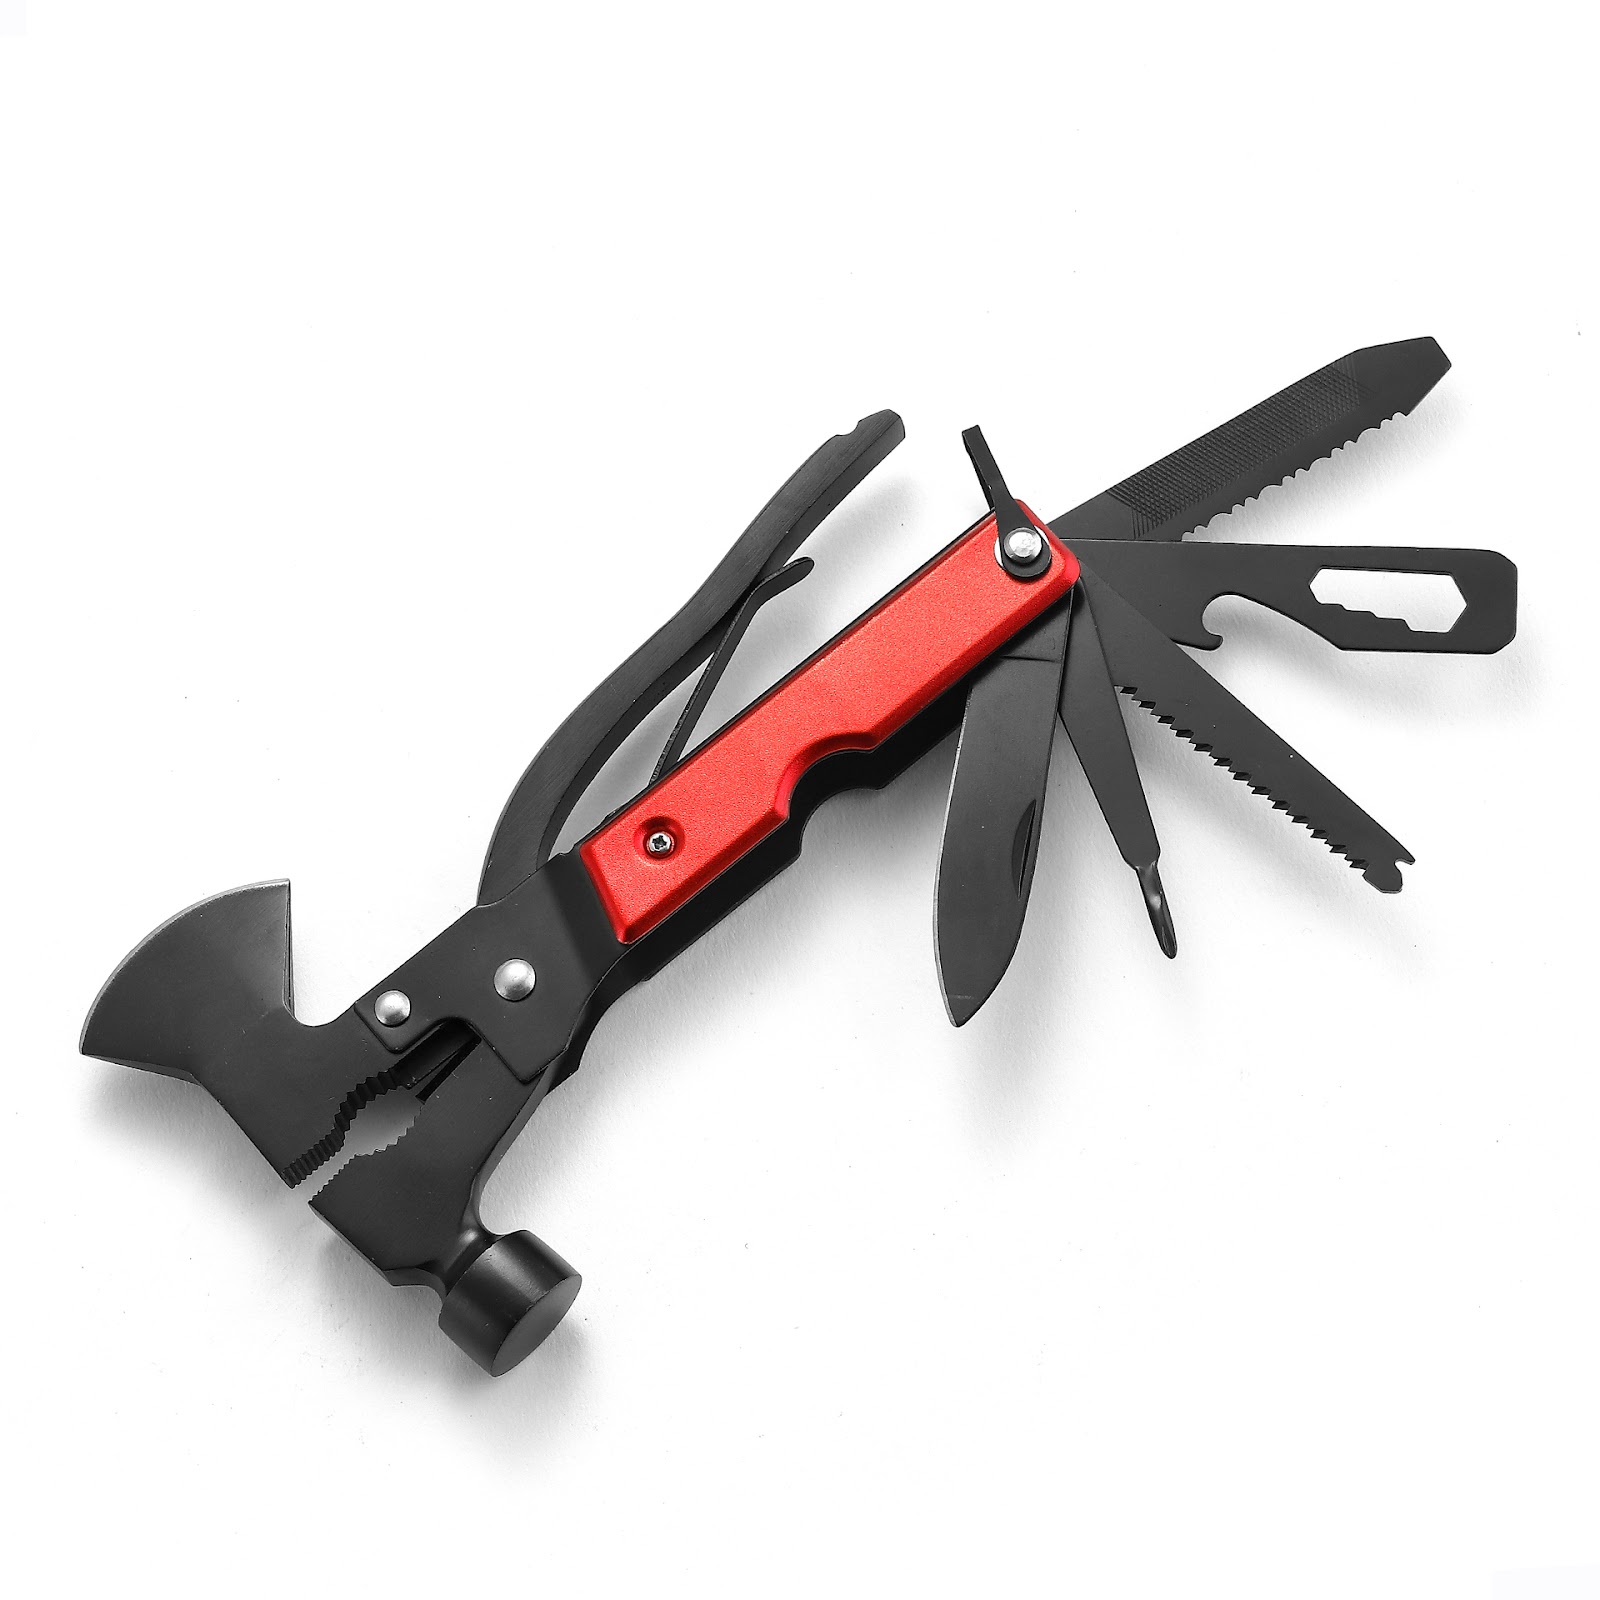 Volken 13-in-1 Multitool with a Hammer, Axe, and Knives